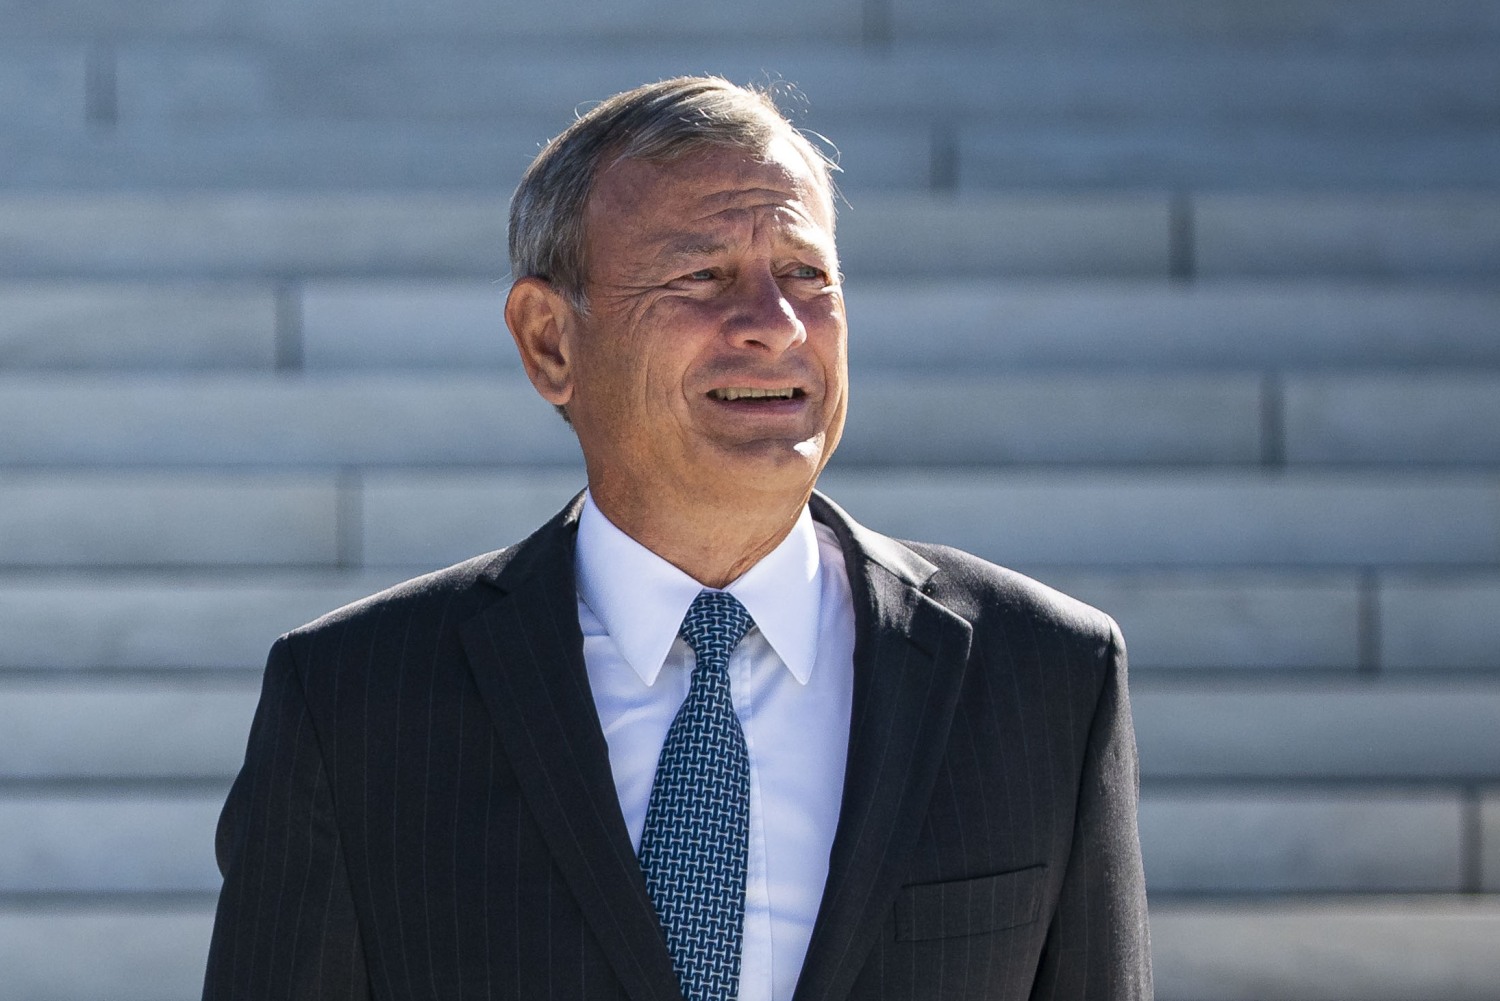 Supreme Court Chief Justice John Roberts gives an incomplete history lesson on judicial ethics